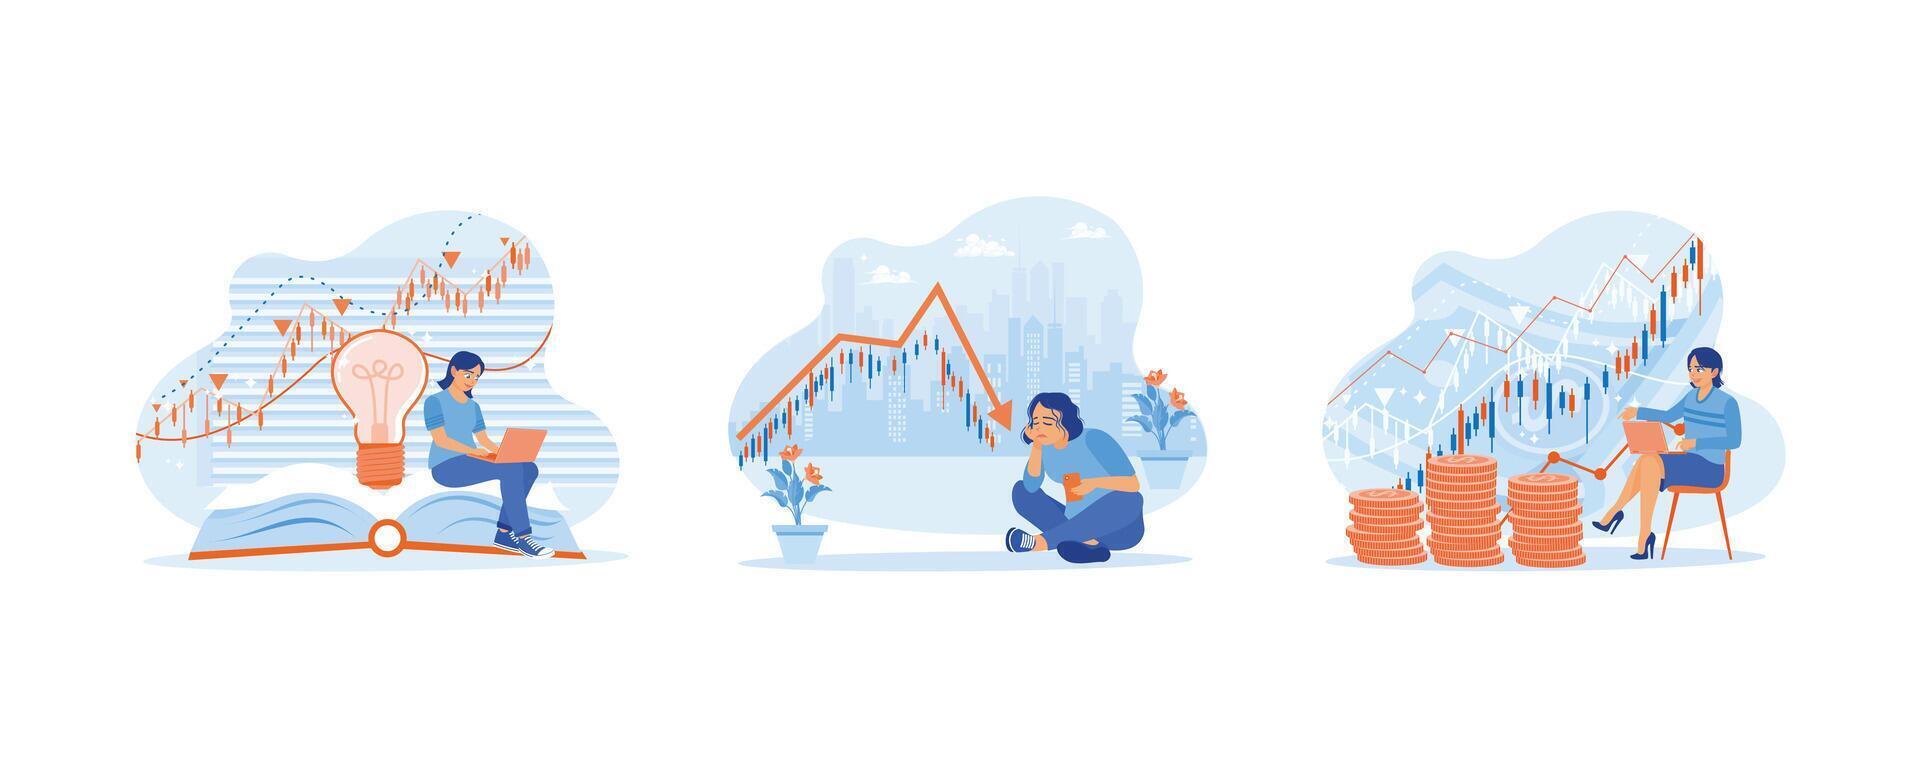 Study the stock market and candlestick charts. She stressed looking at cell phones because of the declining stock exchange market graph. Study business strategy management. Flat vector illustration.